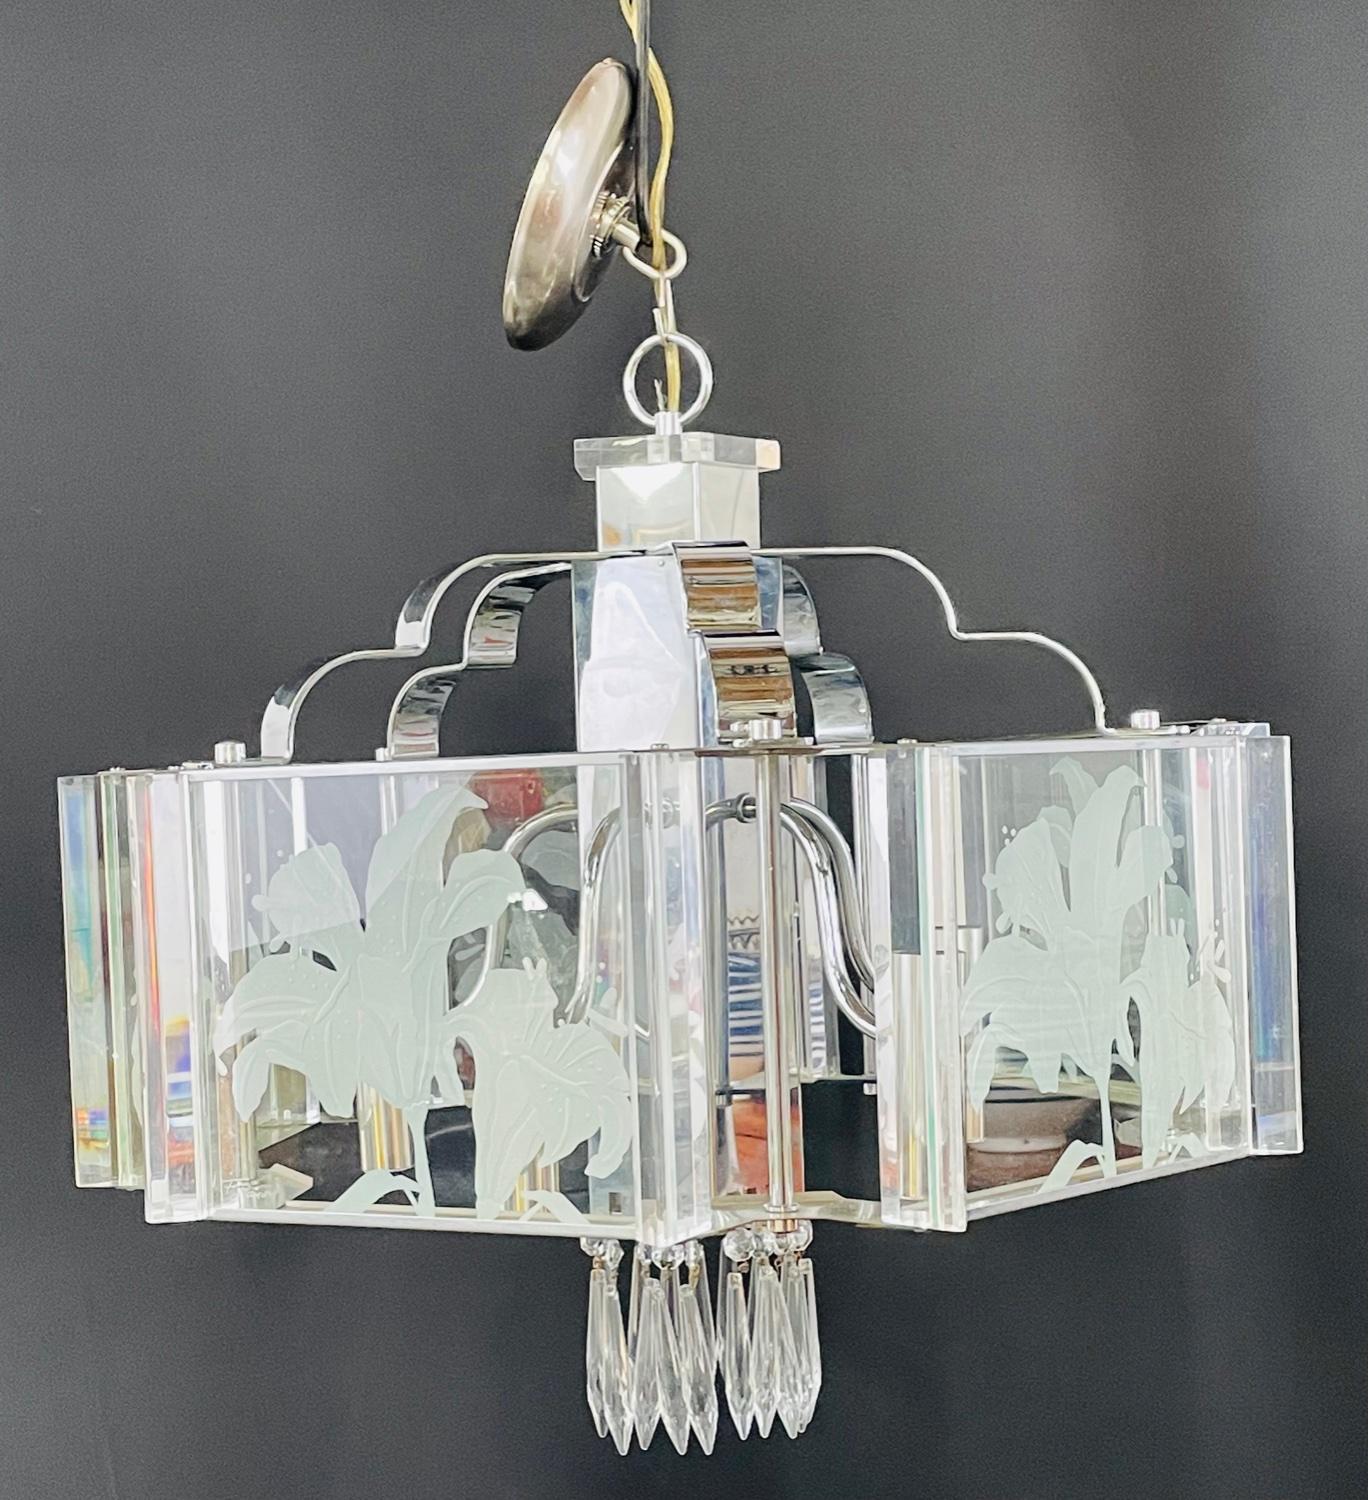 An exquisite Frederick Ramond Art Deco style hexagonal chandelier or pendant featuring 5 glass panes with a beautiful flower etching design framed in lucite and attached around a chrome column ending with crystals in the bottom. The chandelier has 5